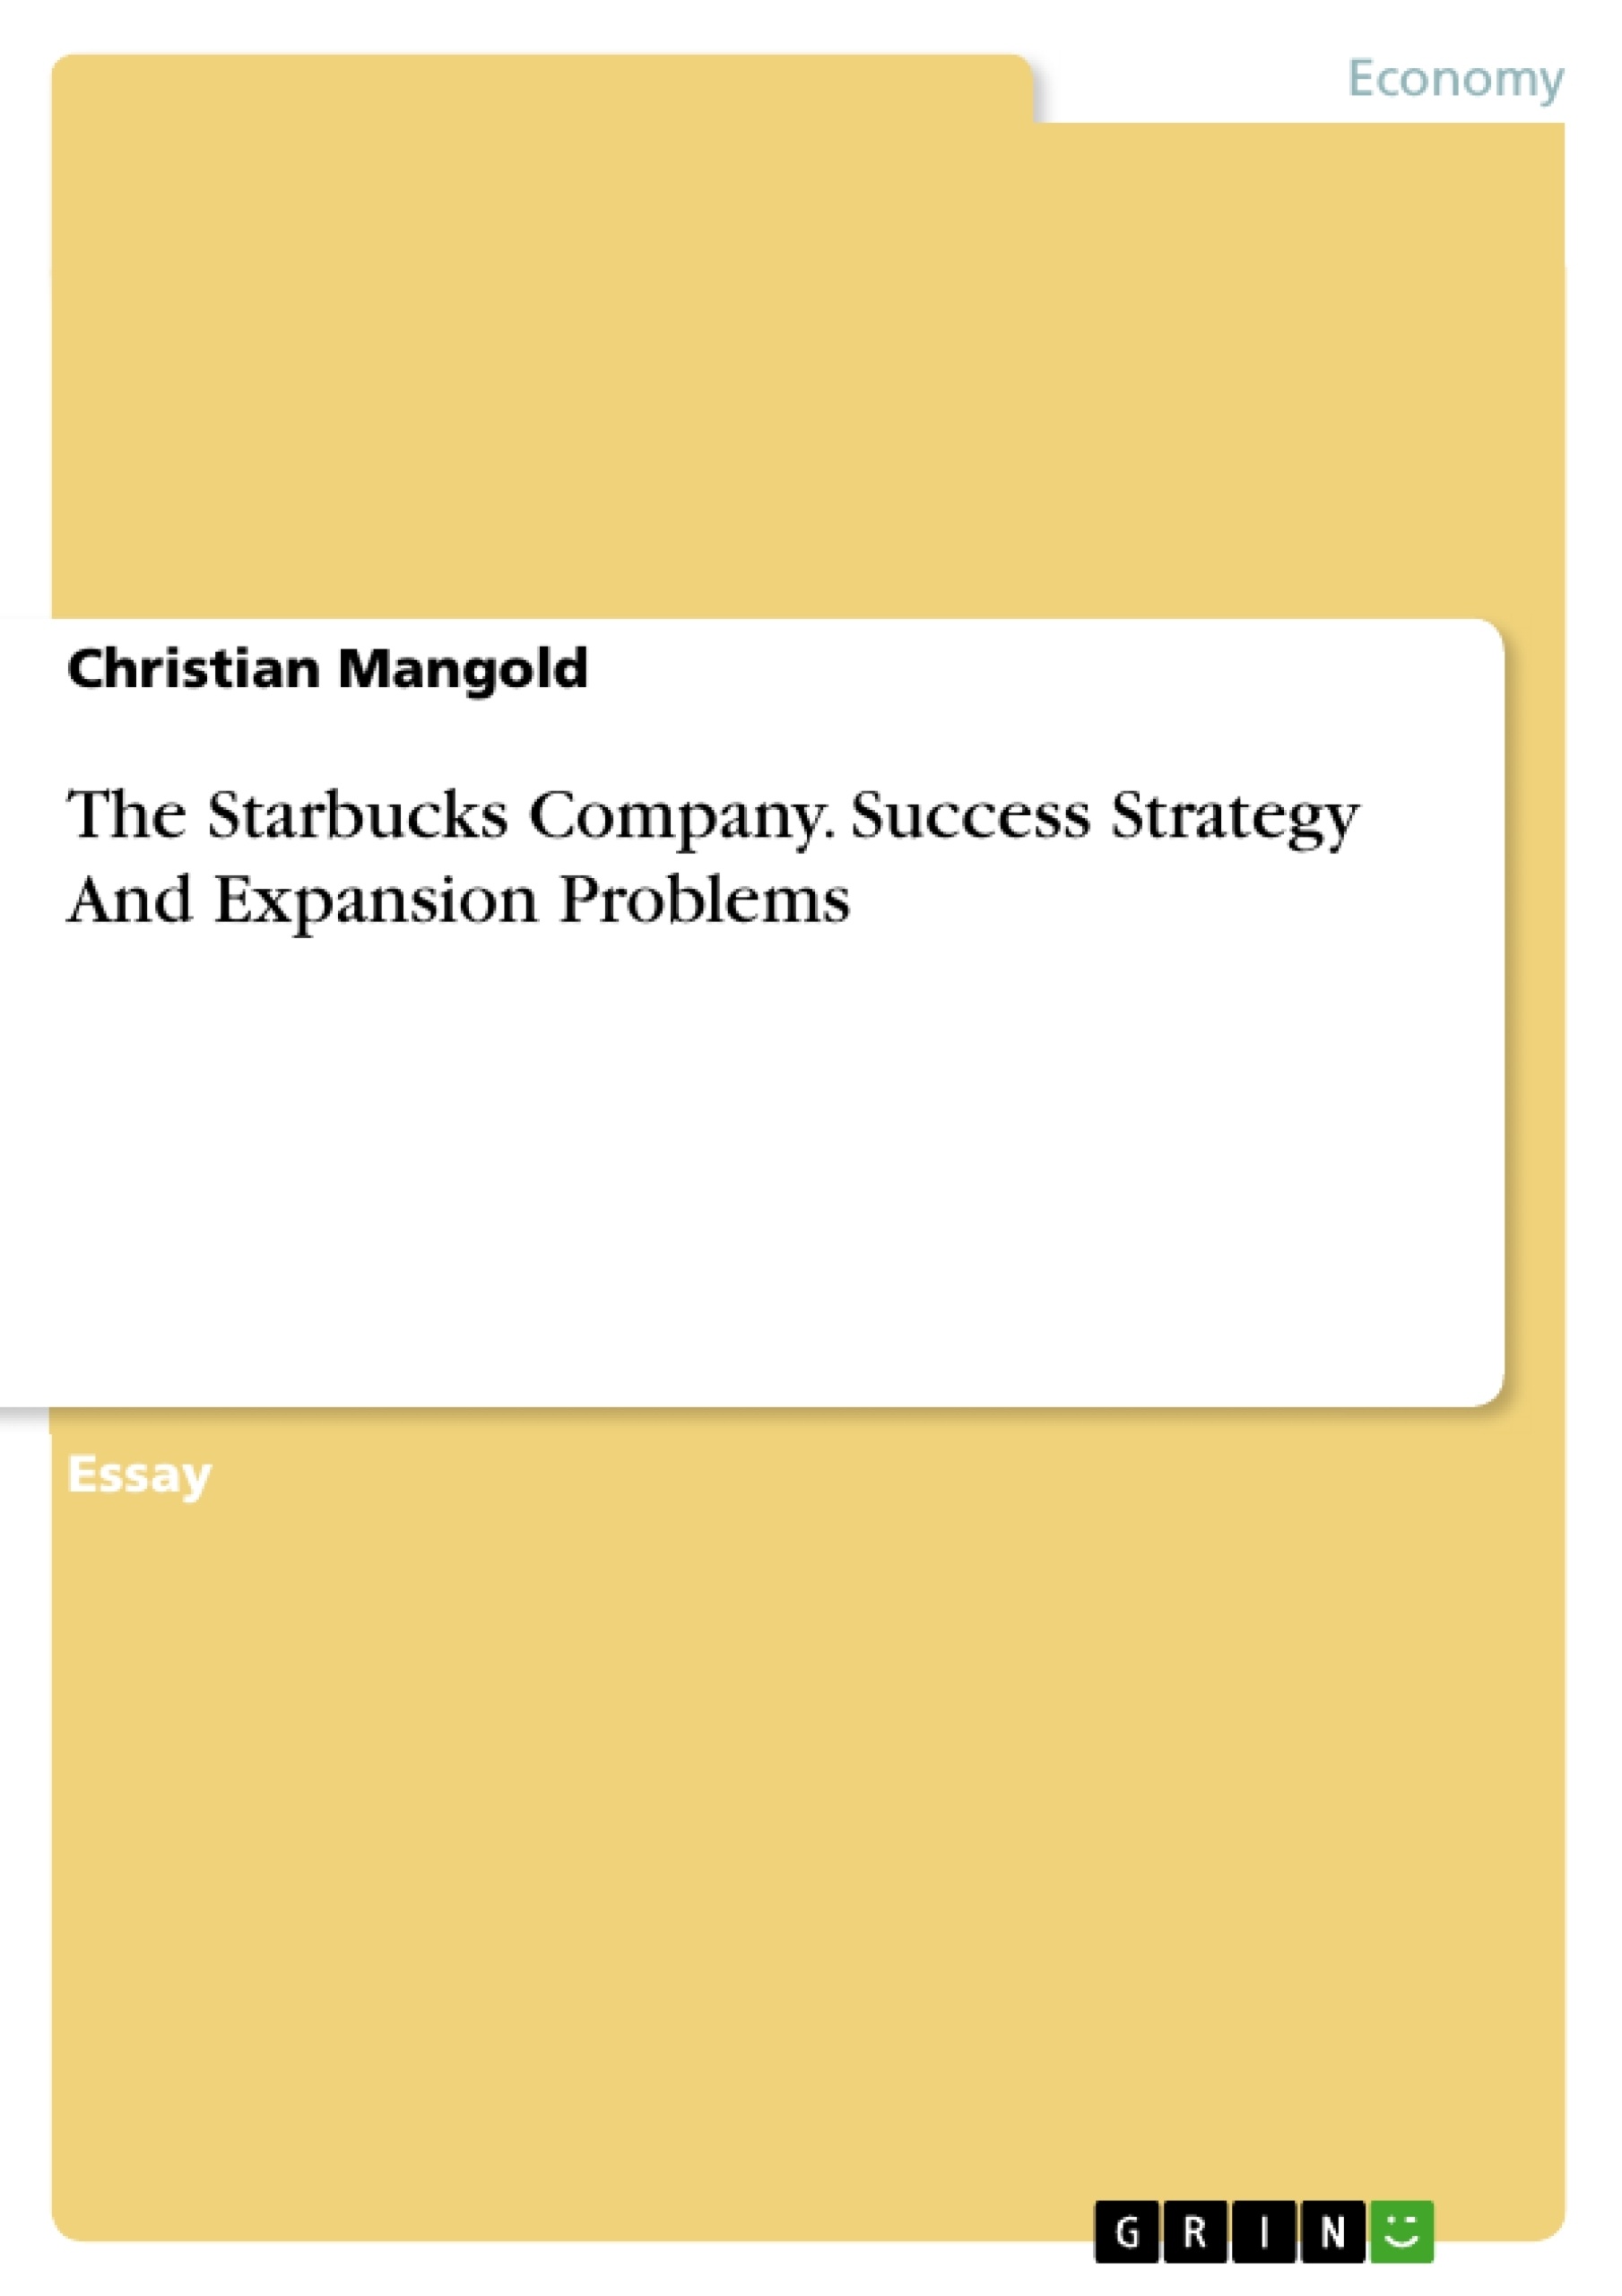 Title: The Starbucks Company. Success Strategy And Expansion Problems